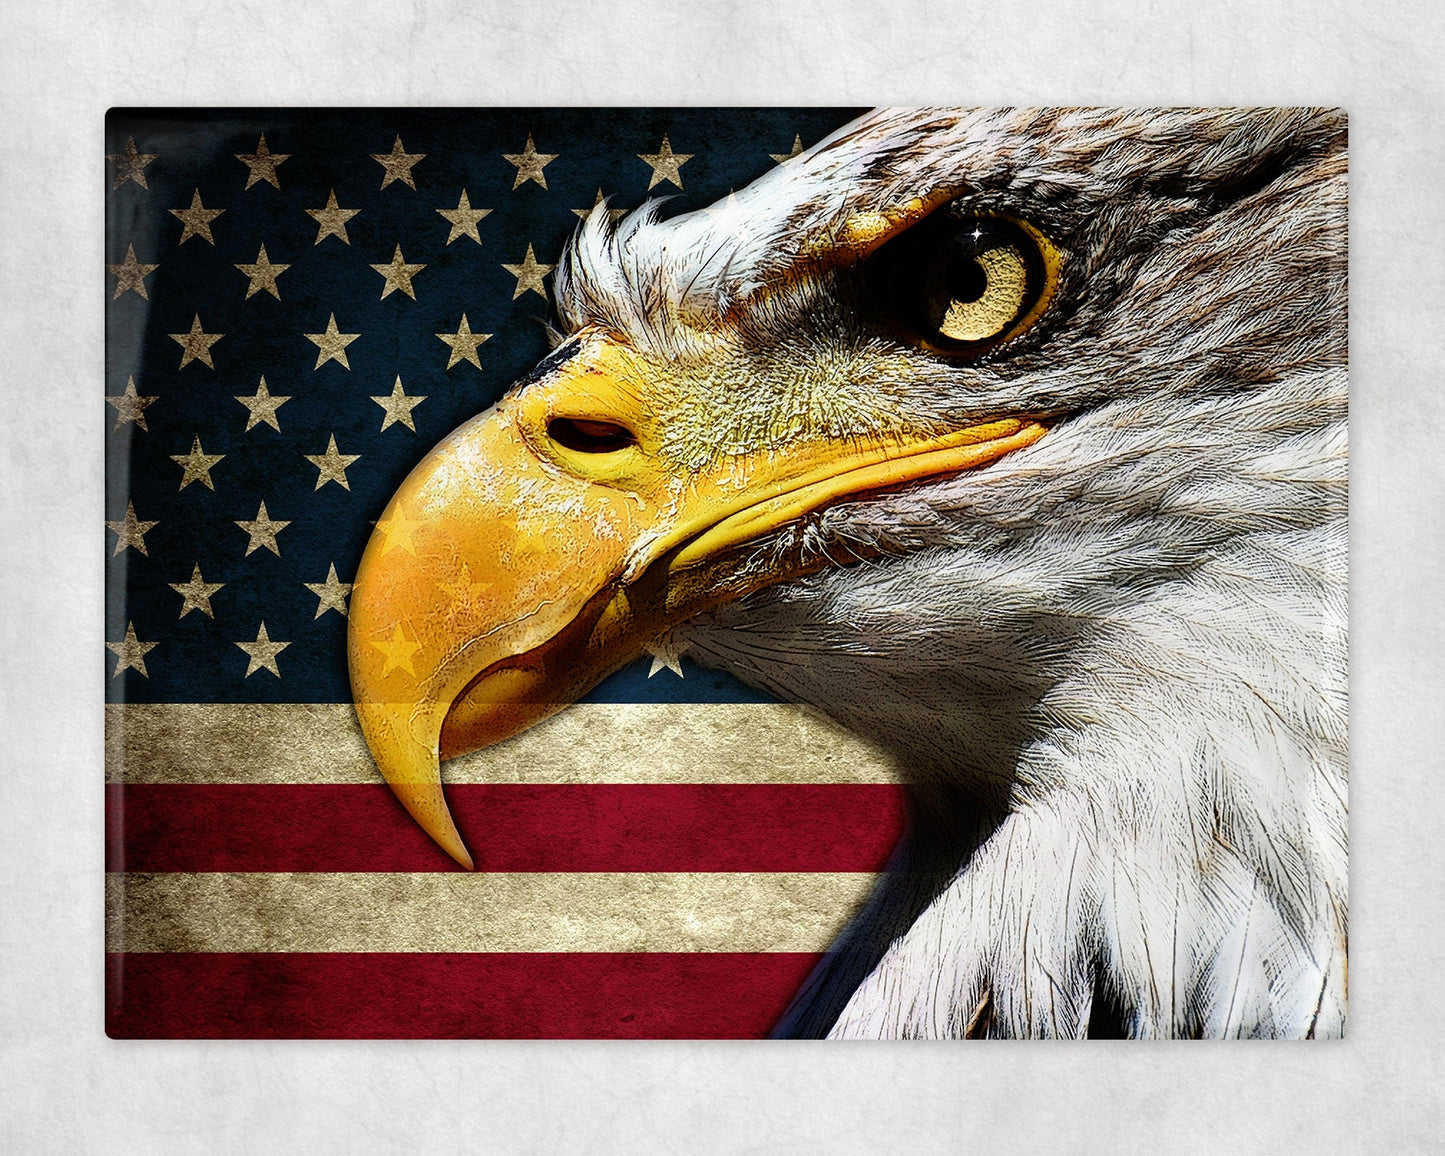 Bald Eagle American Flag Art Decorative Ceramic Tile with Optional Easel Back - 6x8 inches